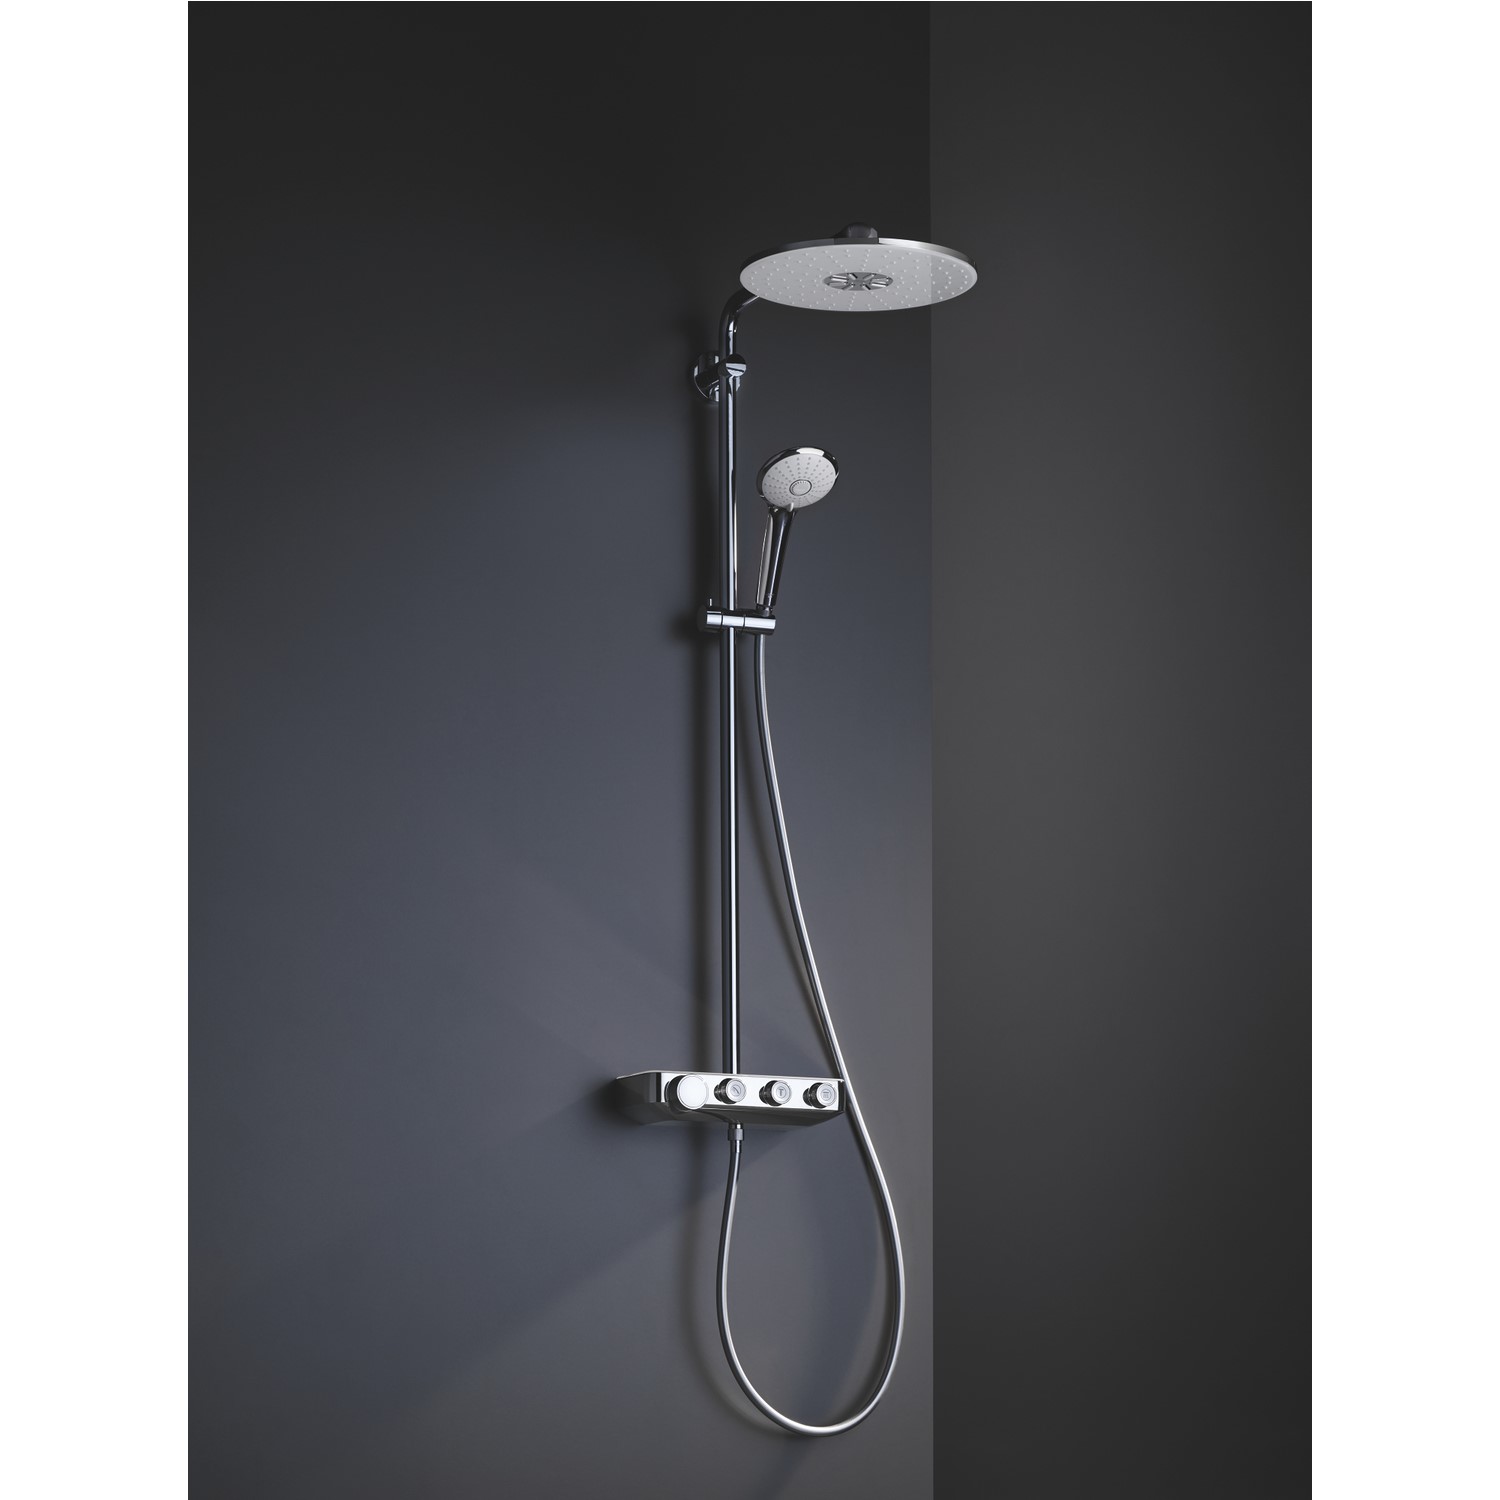 Grohe Duo Smart Control Mixer Shower with Round Overhead Handset 26507LS0 | Appliances Direct